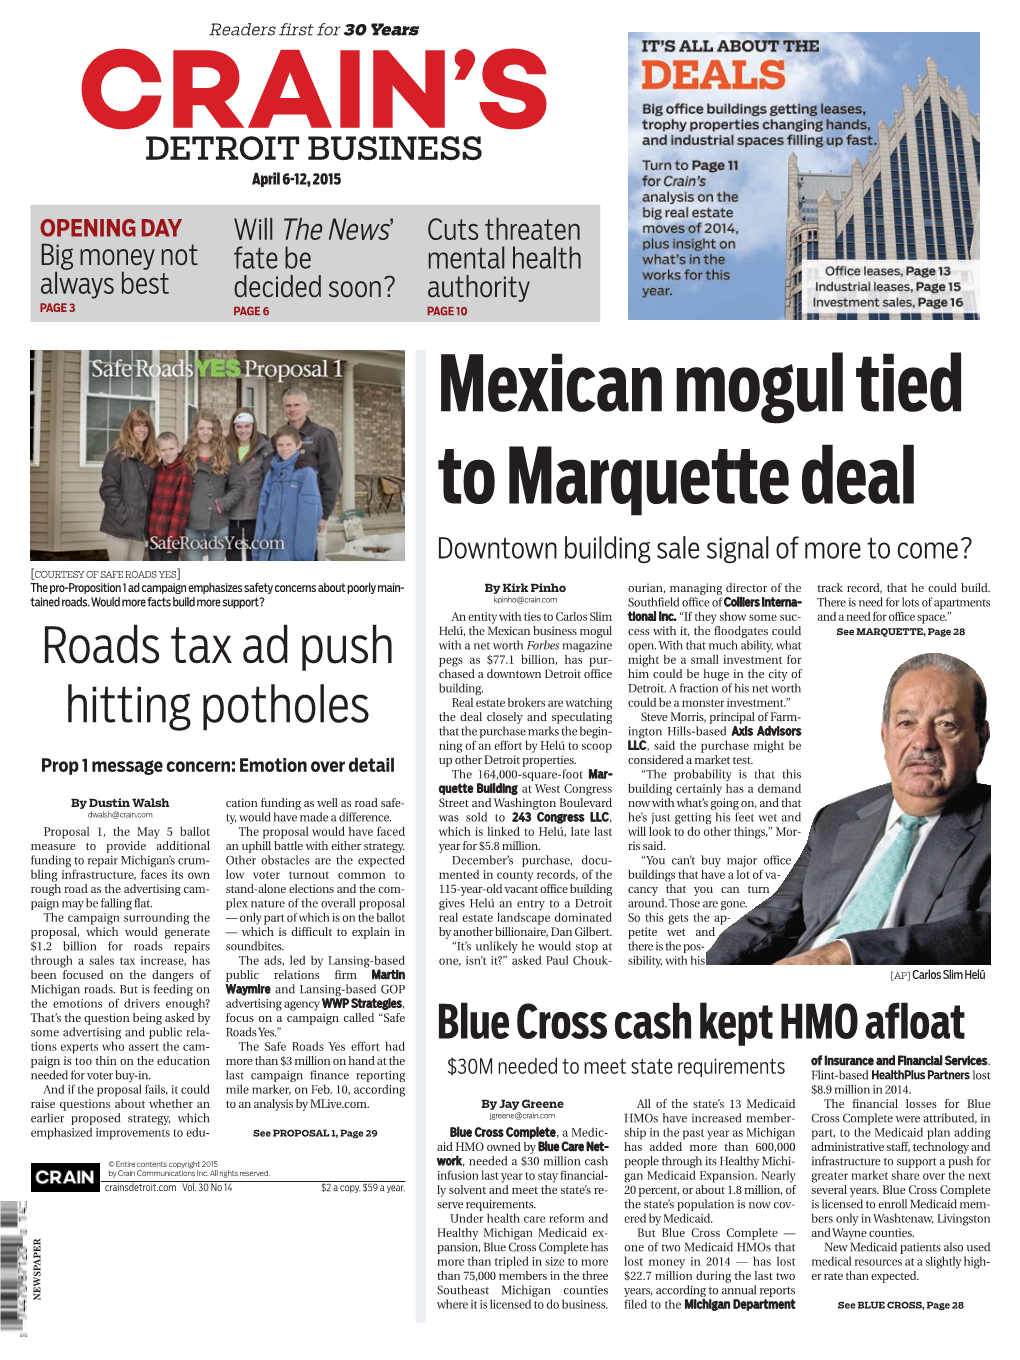 Mexican Mogul Tied to Marquette Deal